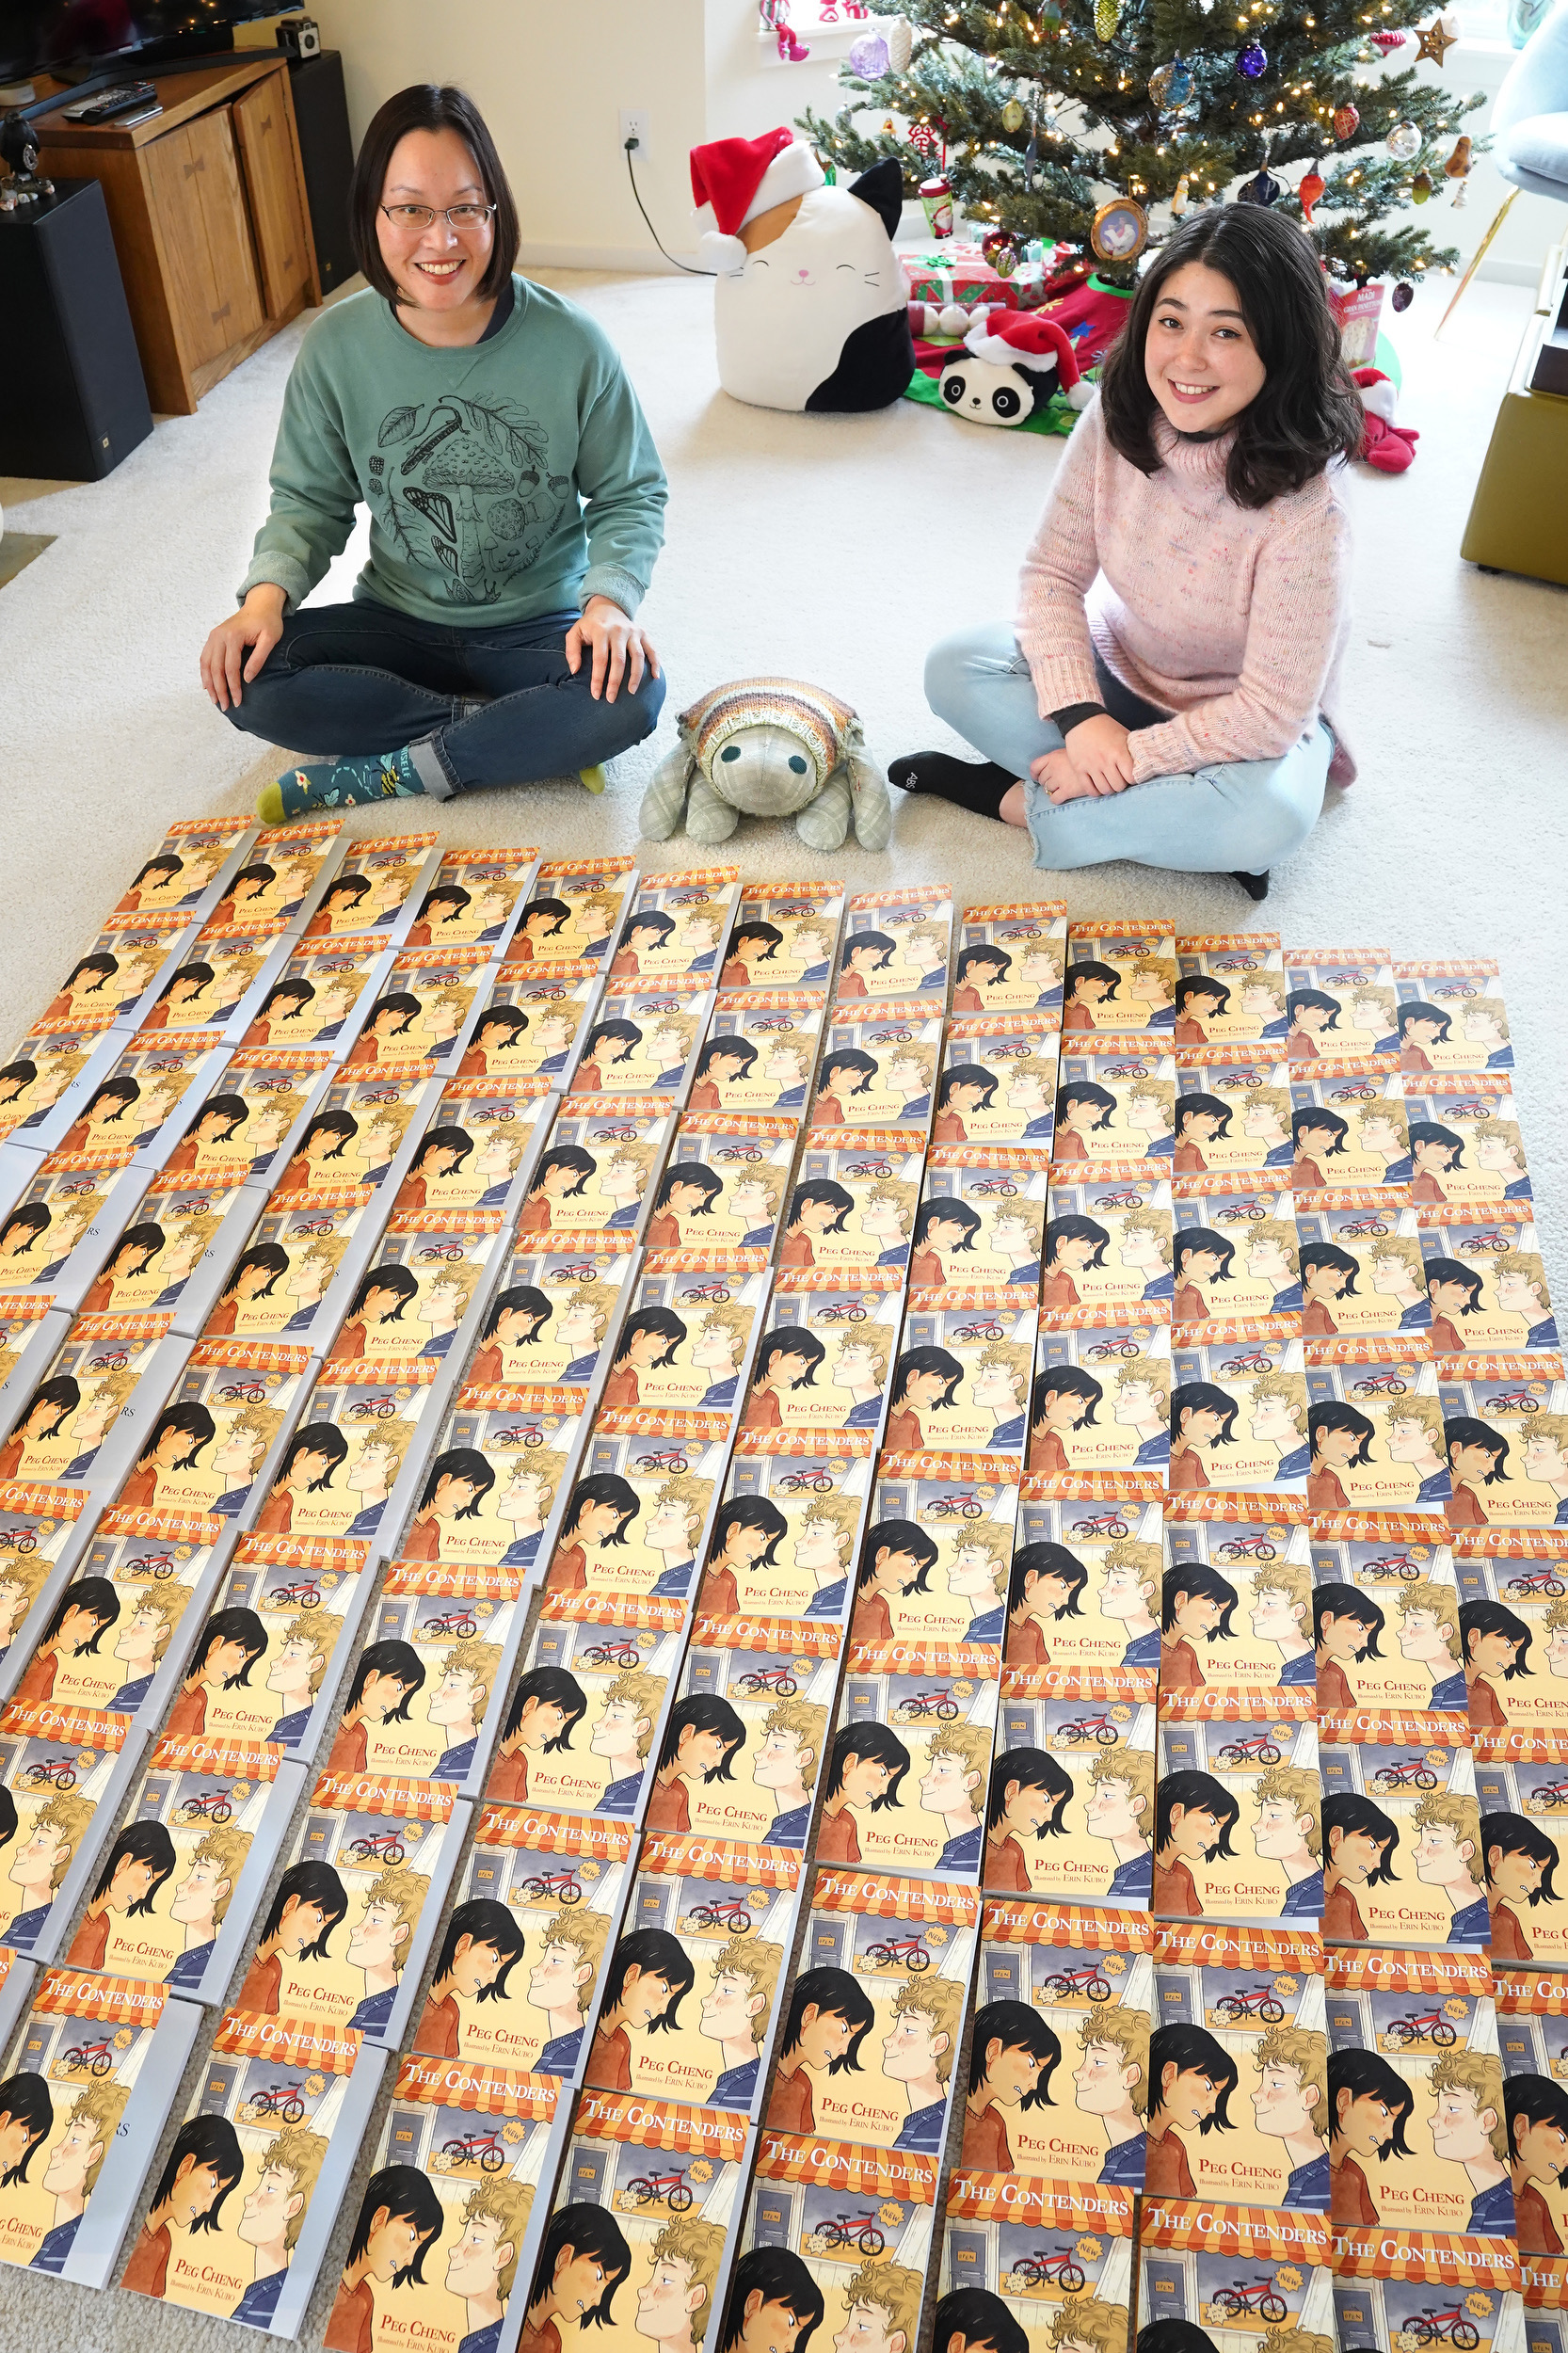 Author Peg Cheng & illustrator Erin Kubo sign the first 100 copies of The Contenders.